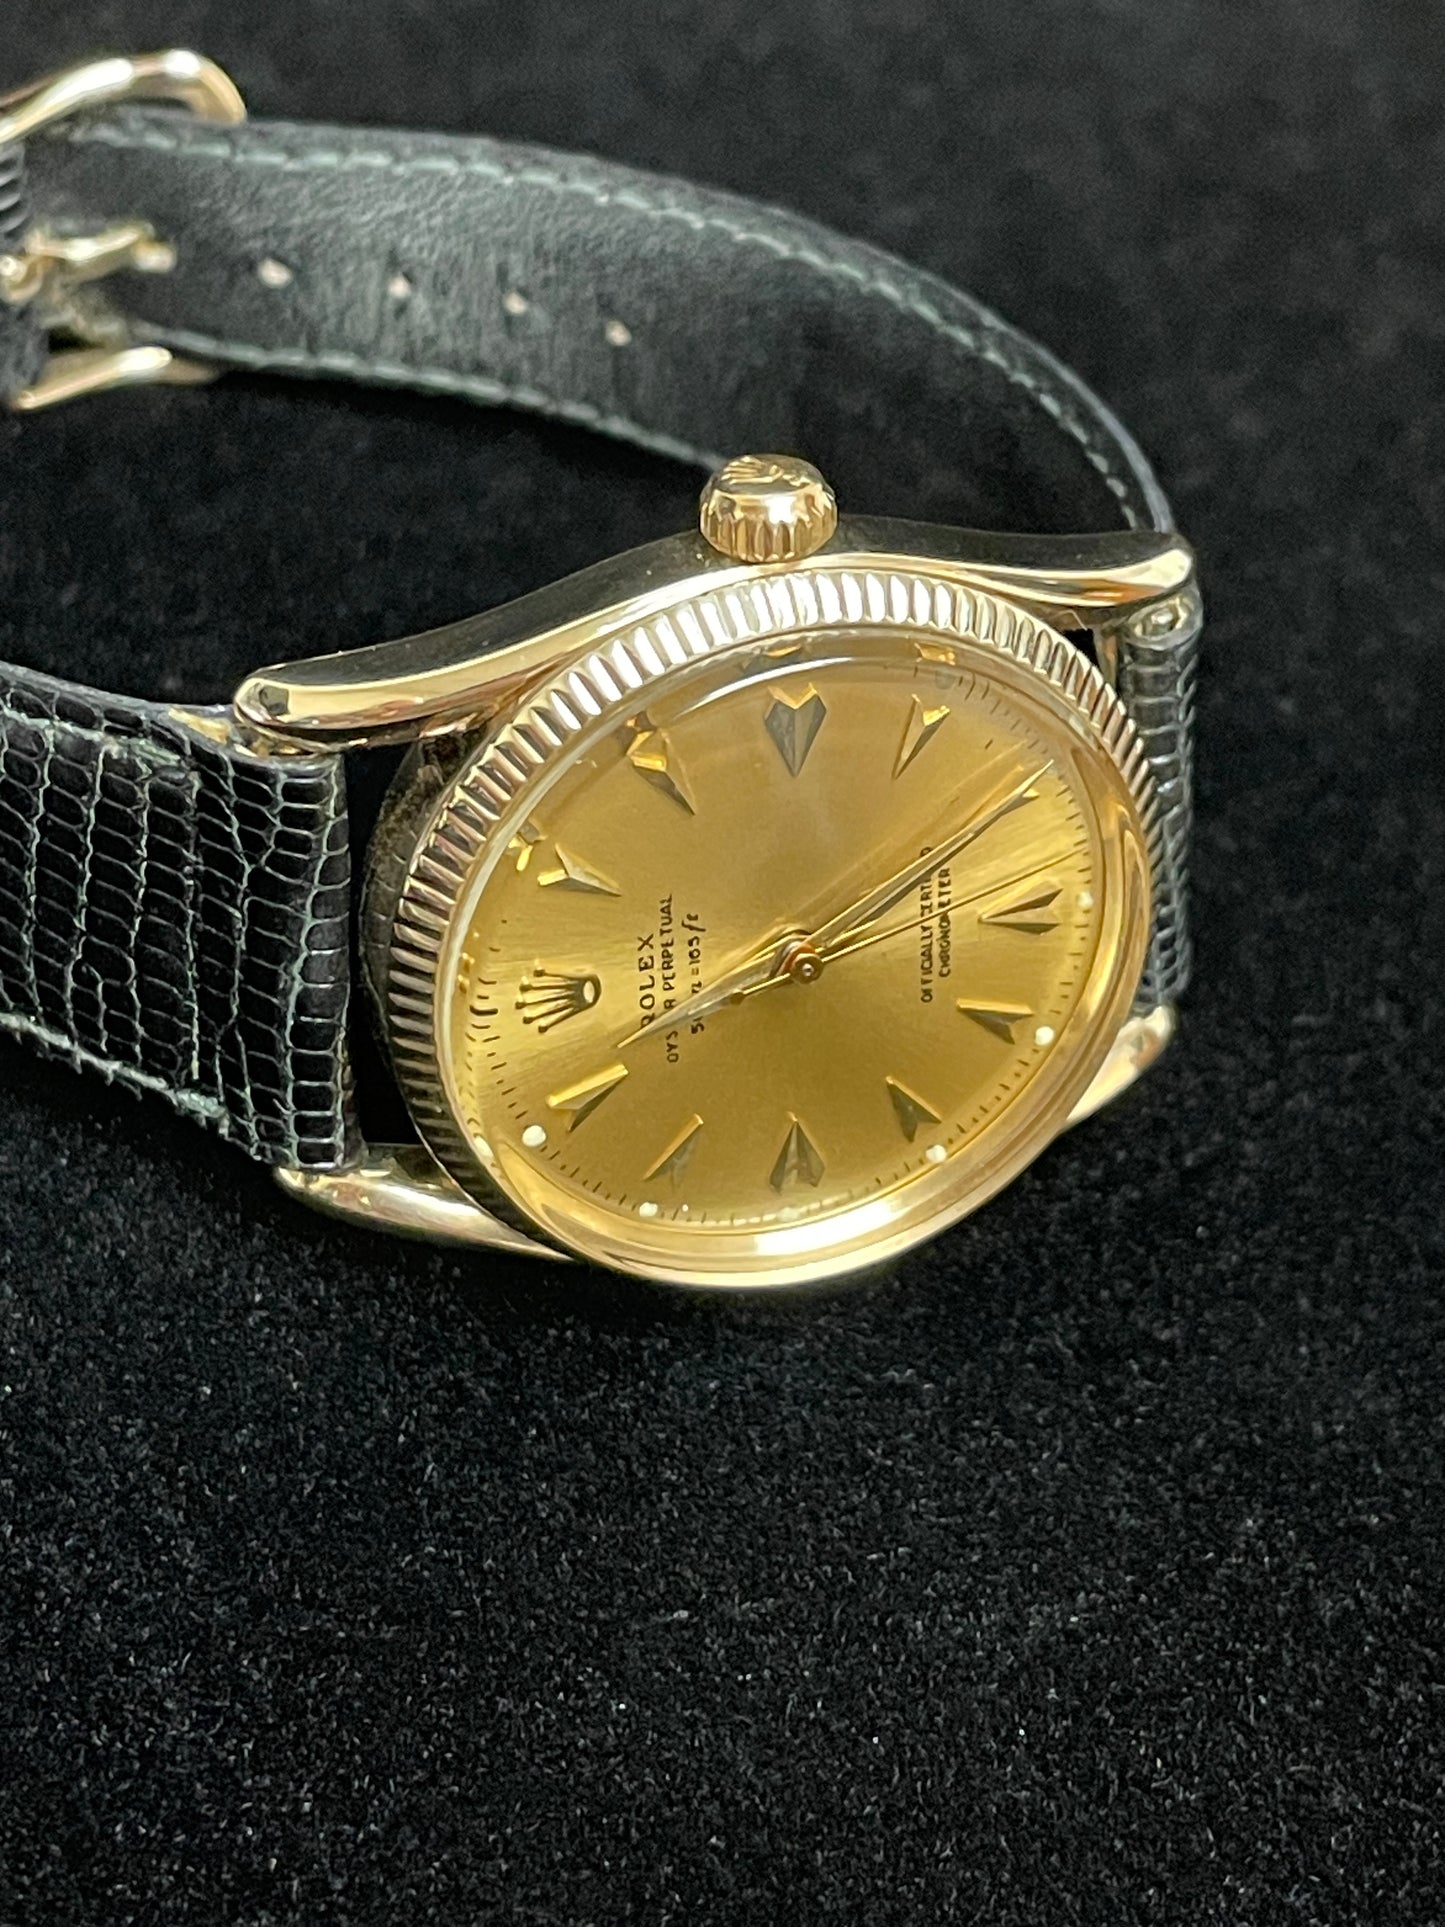 1956 Rolex Oyster Perpetual 6593 Champagne Dial Solid 14kt Leather Strap 34mm